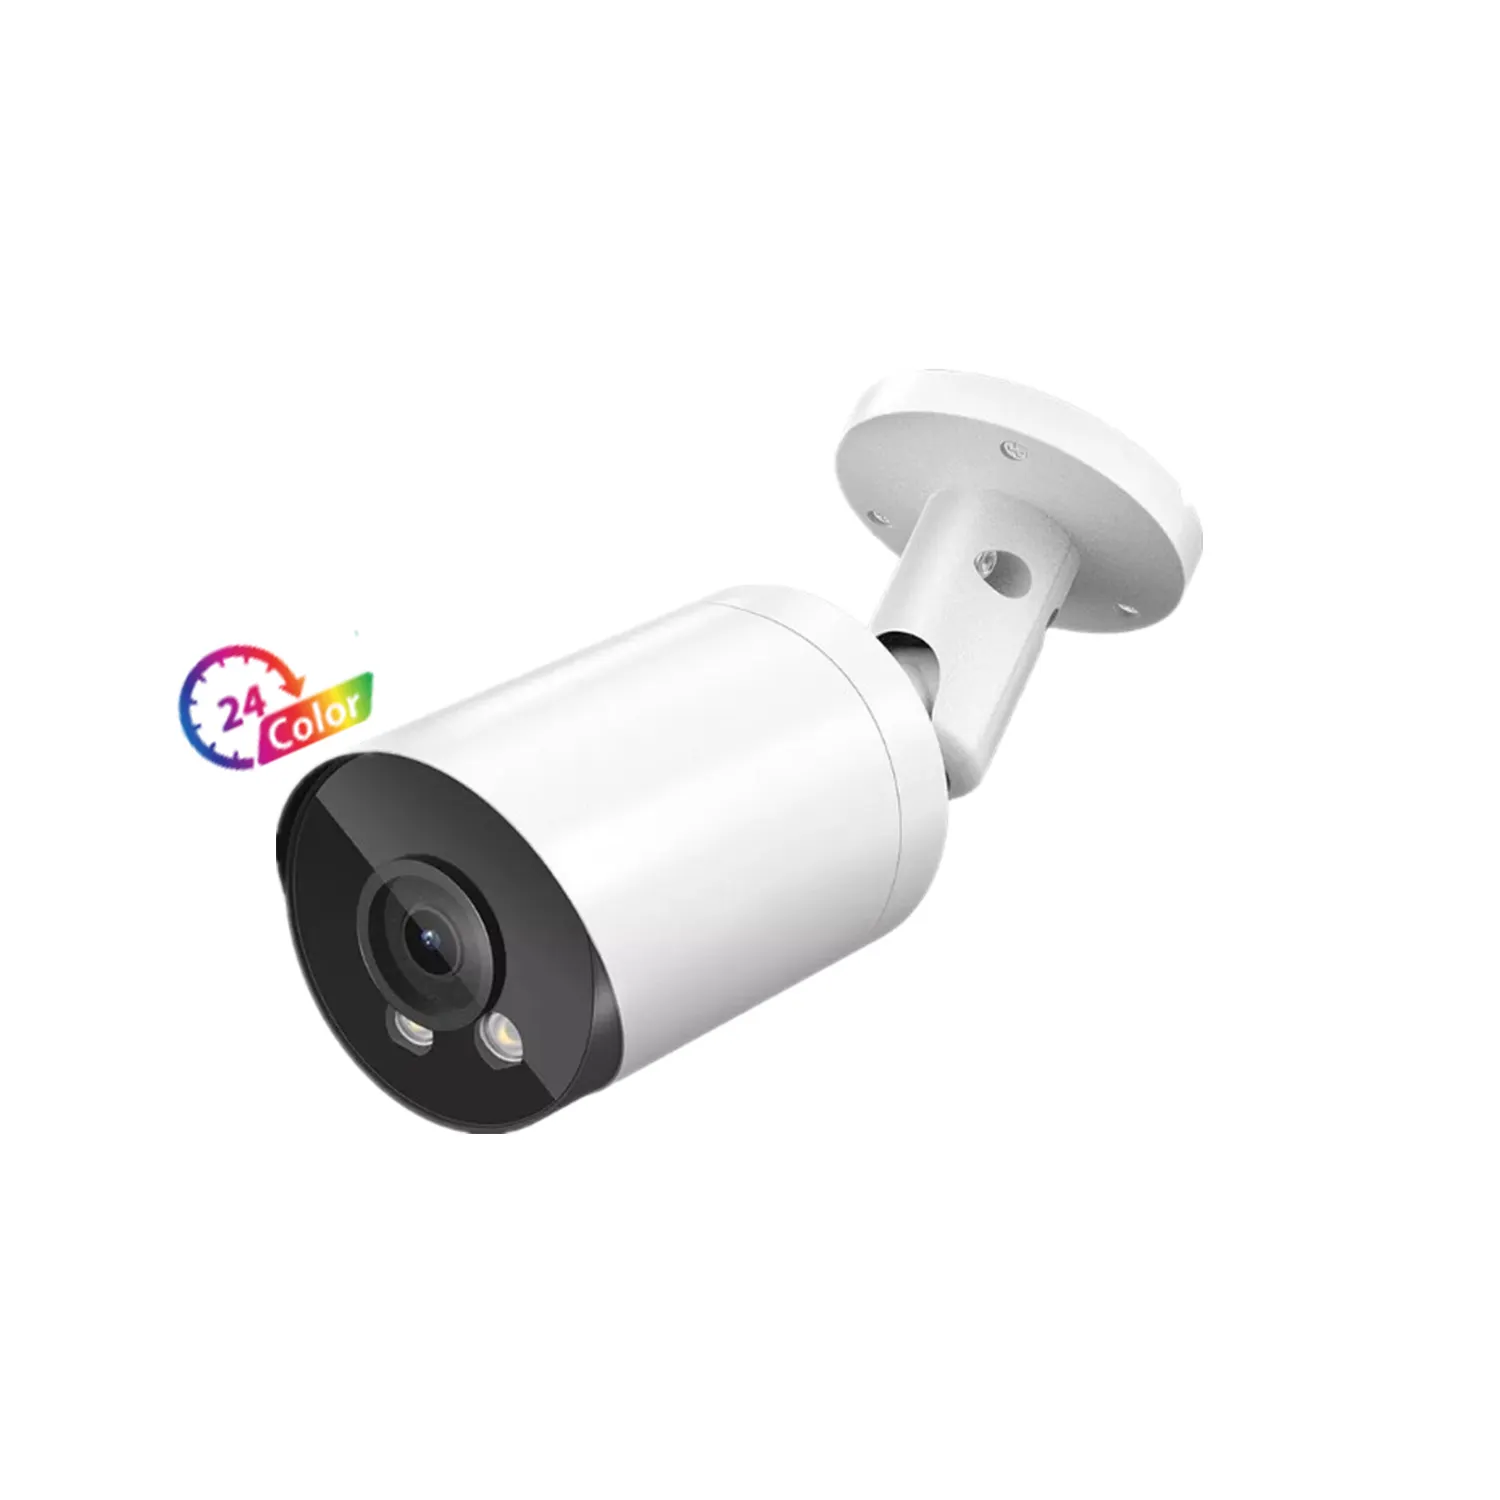 full night color 4k poe ip outdoor camera color vu bullet security system h.265 waterproof p2p cloud ai human detection